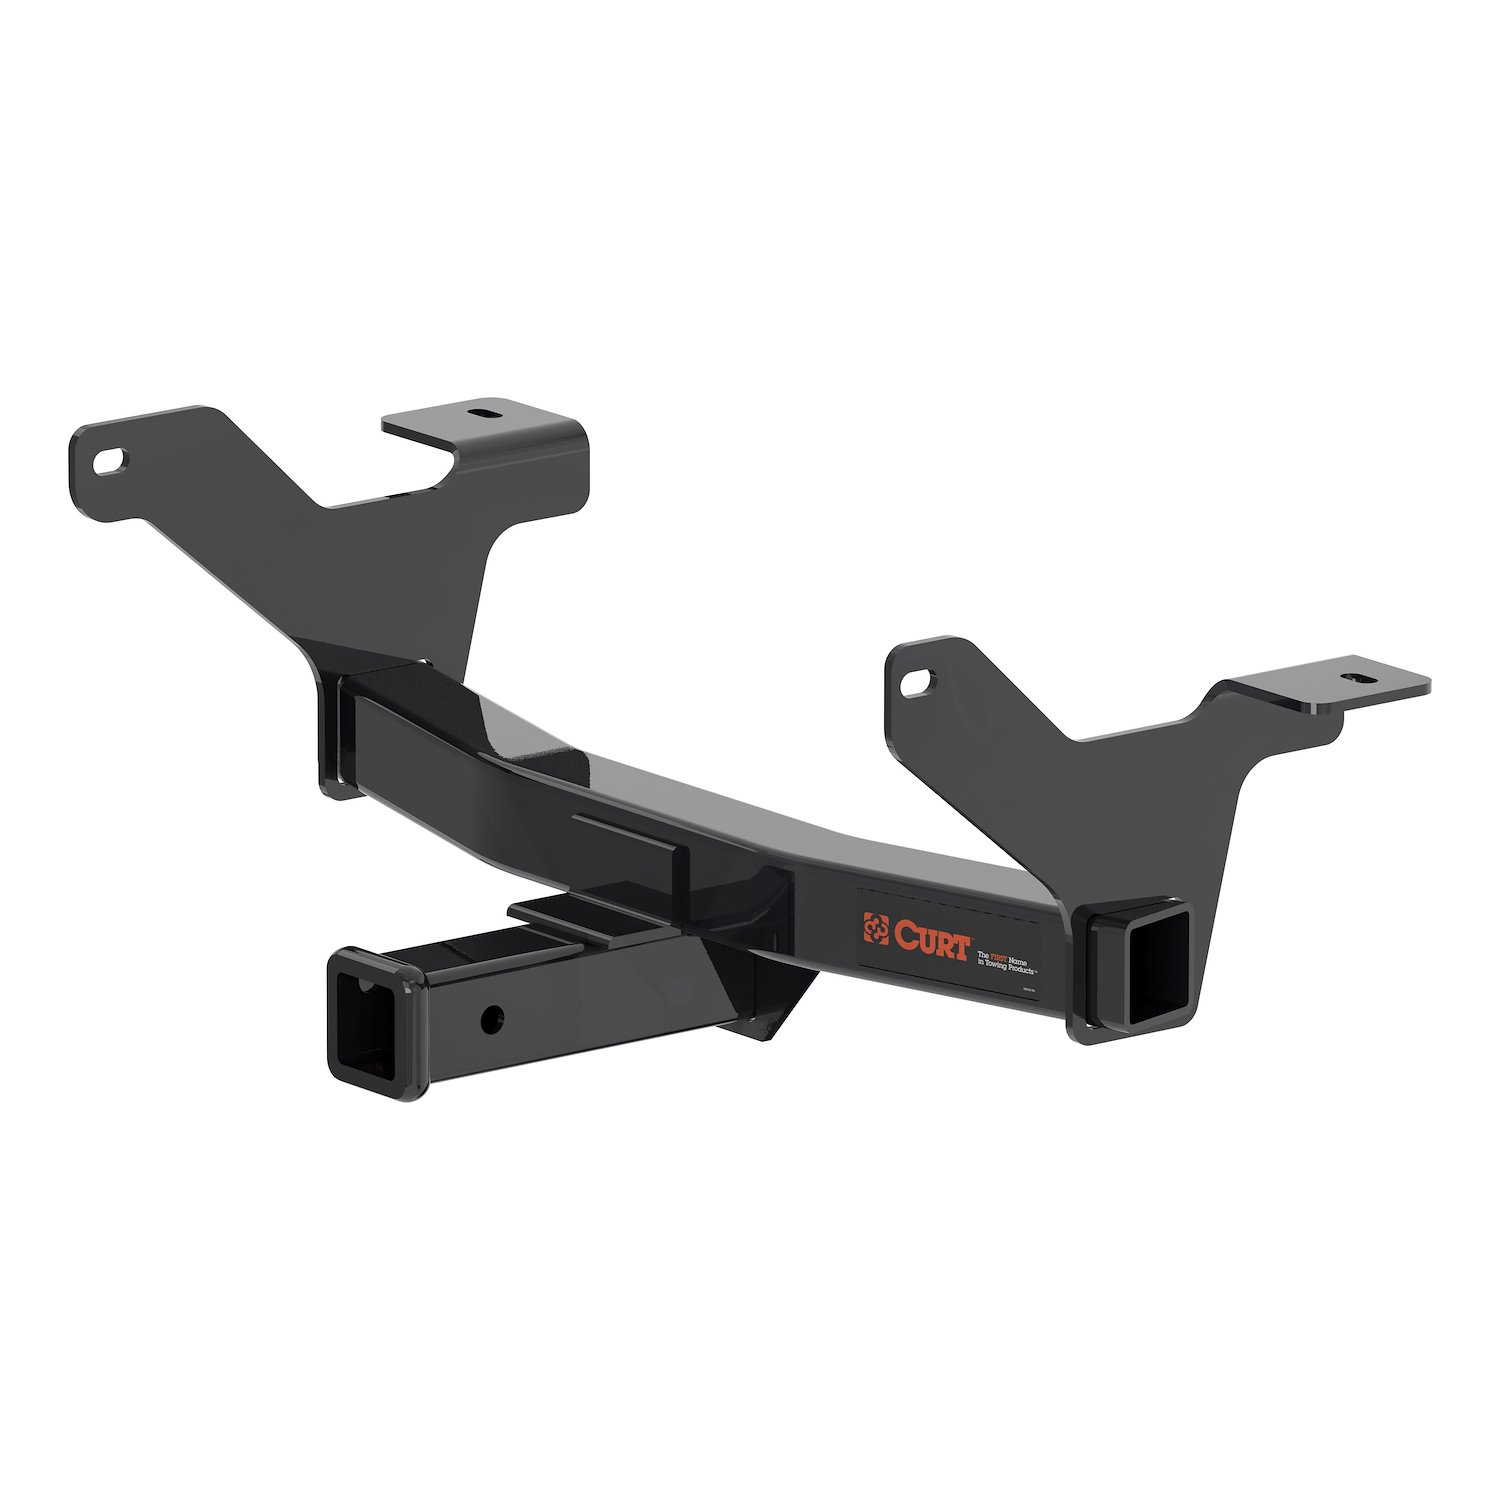 GM1500 FRONT MOUNT HITCH